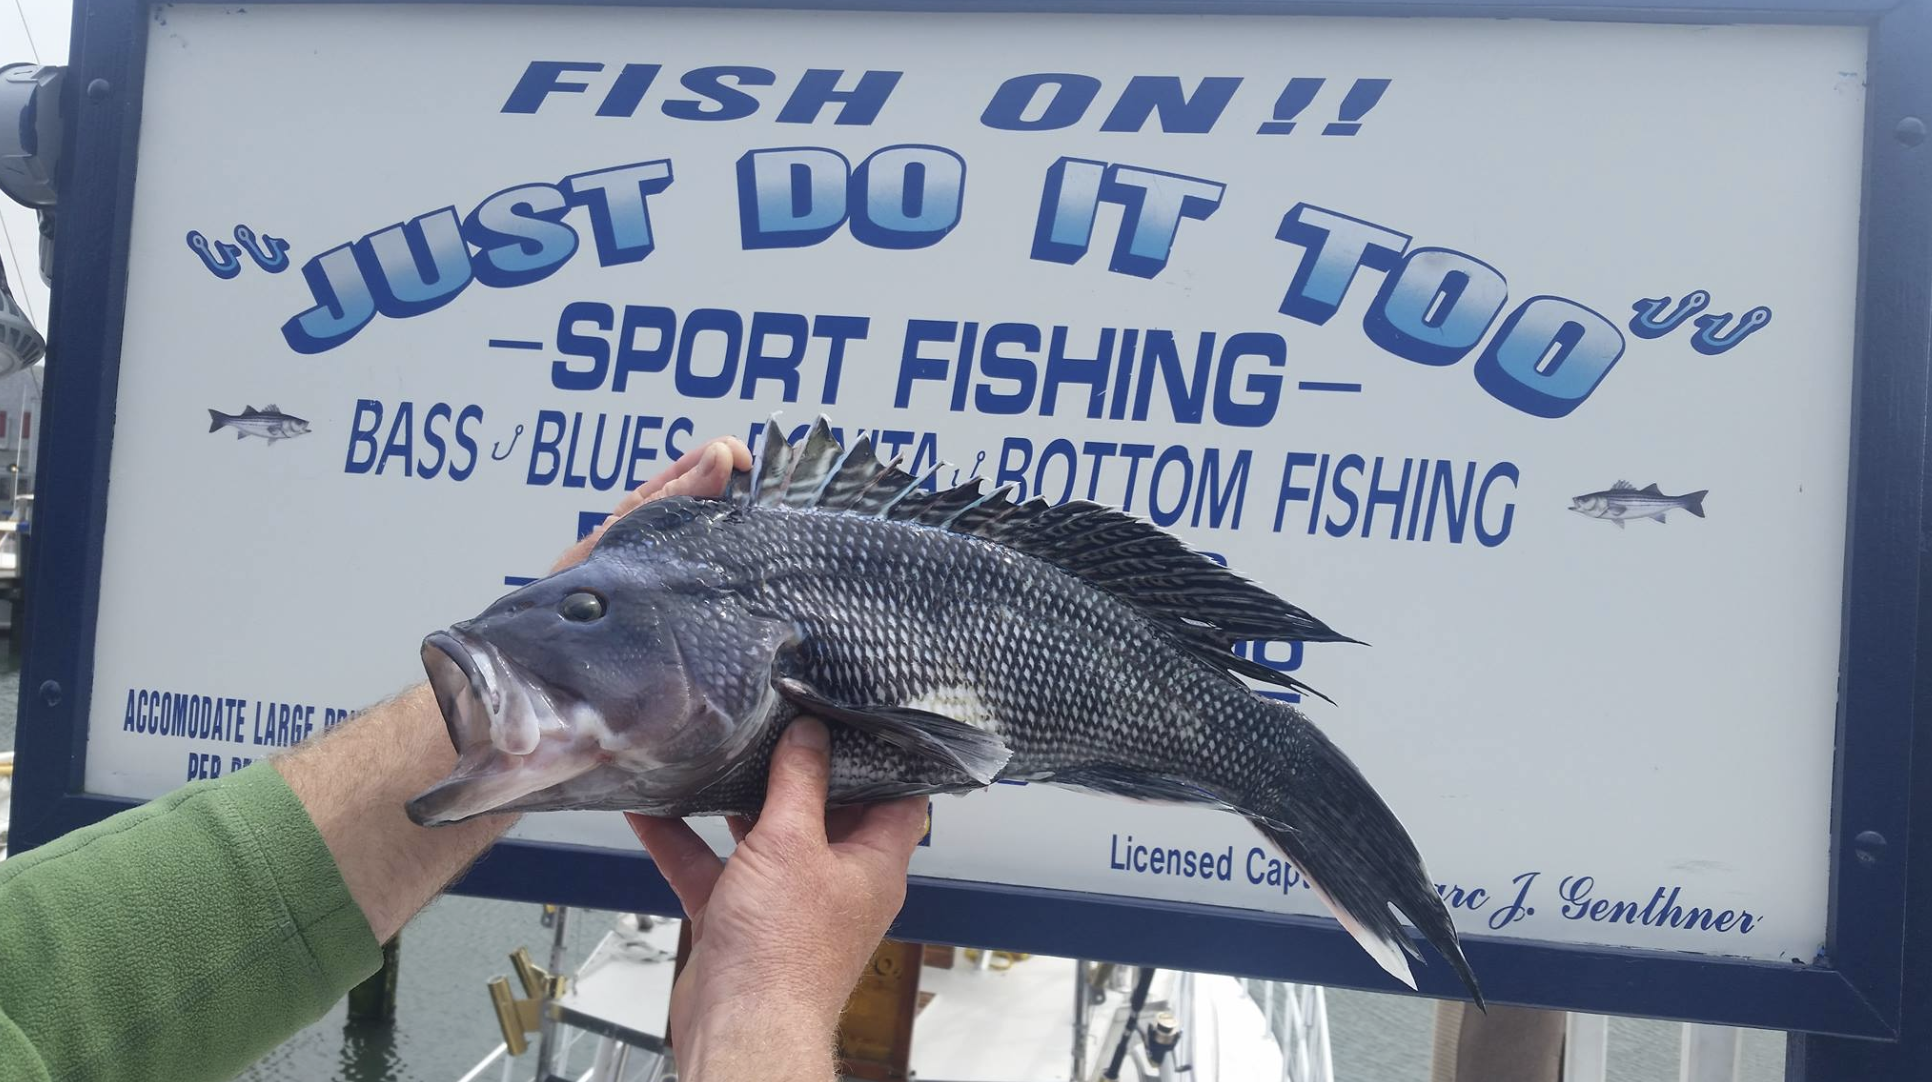 Just Do It Too Sport Fishing